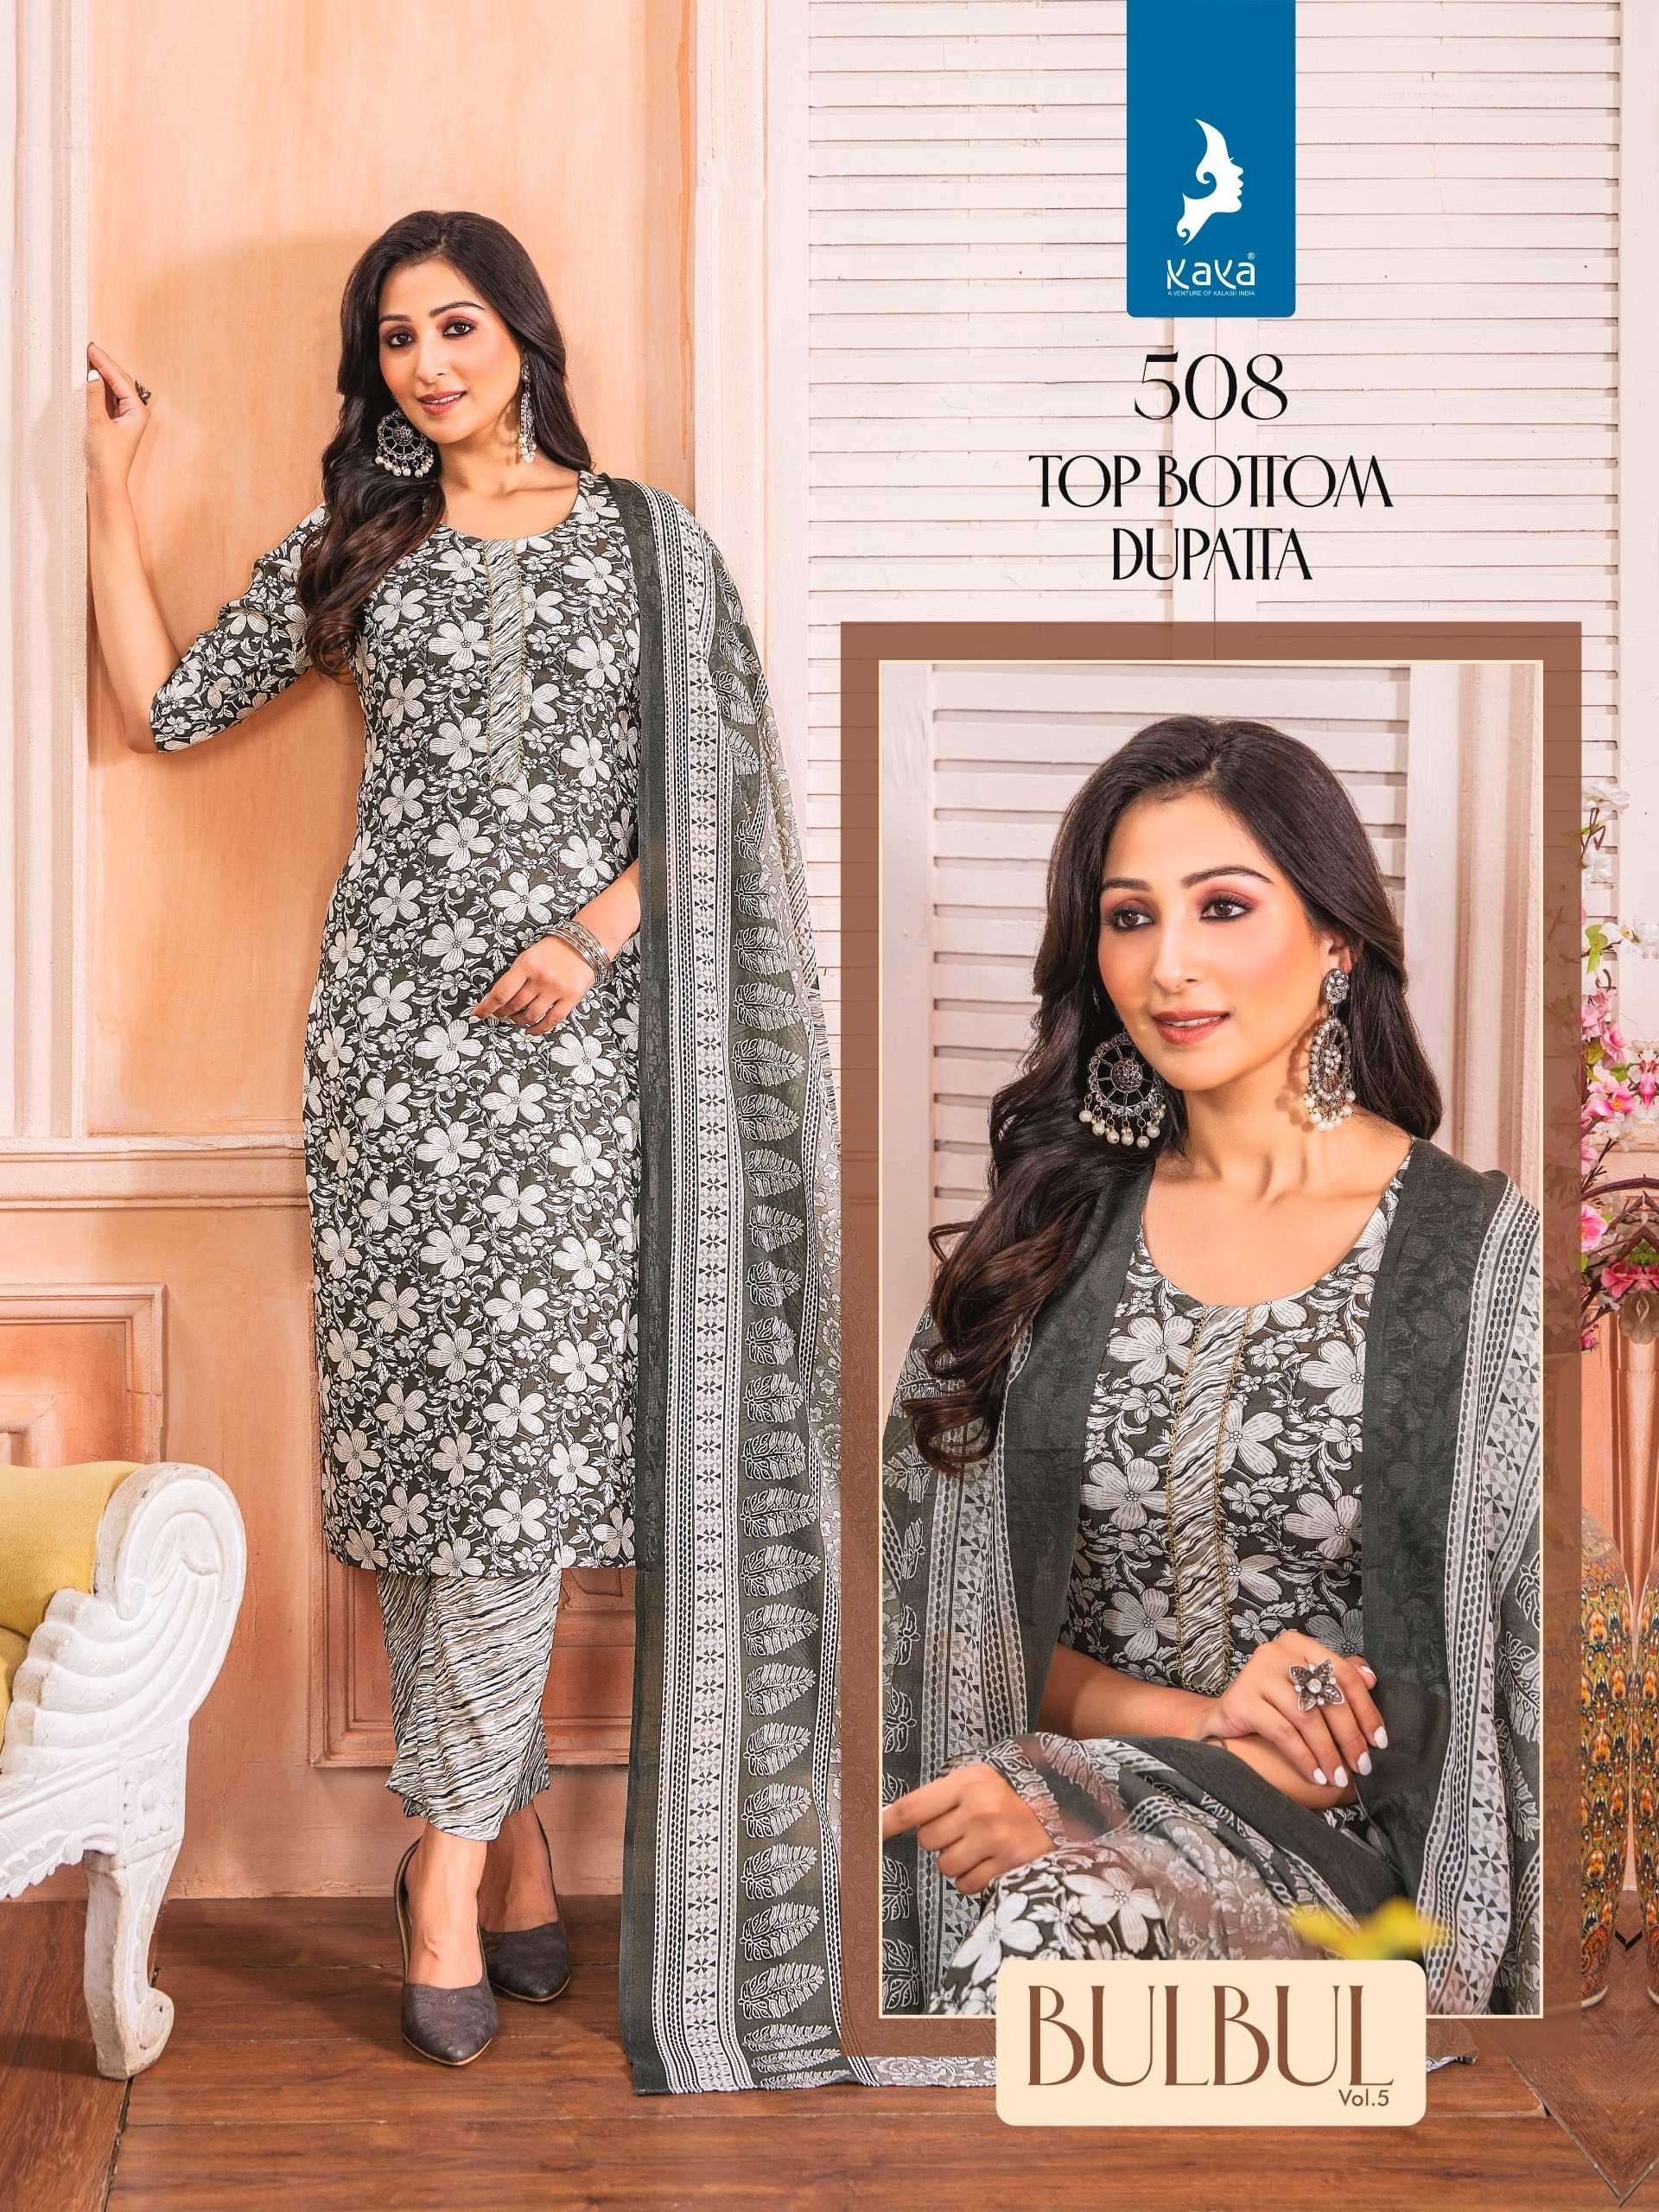 BULBUL VOL-5 SERIES 501 TO 508 BY KAYA DESIGNER WITH PRINTED RAYON KURT8I WITH BOTTOM AND DUPATTA ARE AVAILABLE AT WHOLESALE PRICE